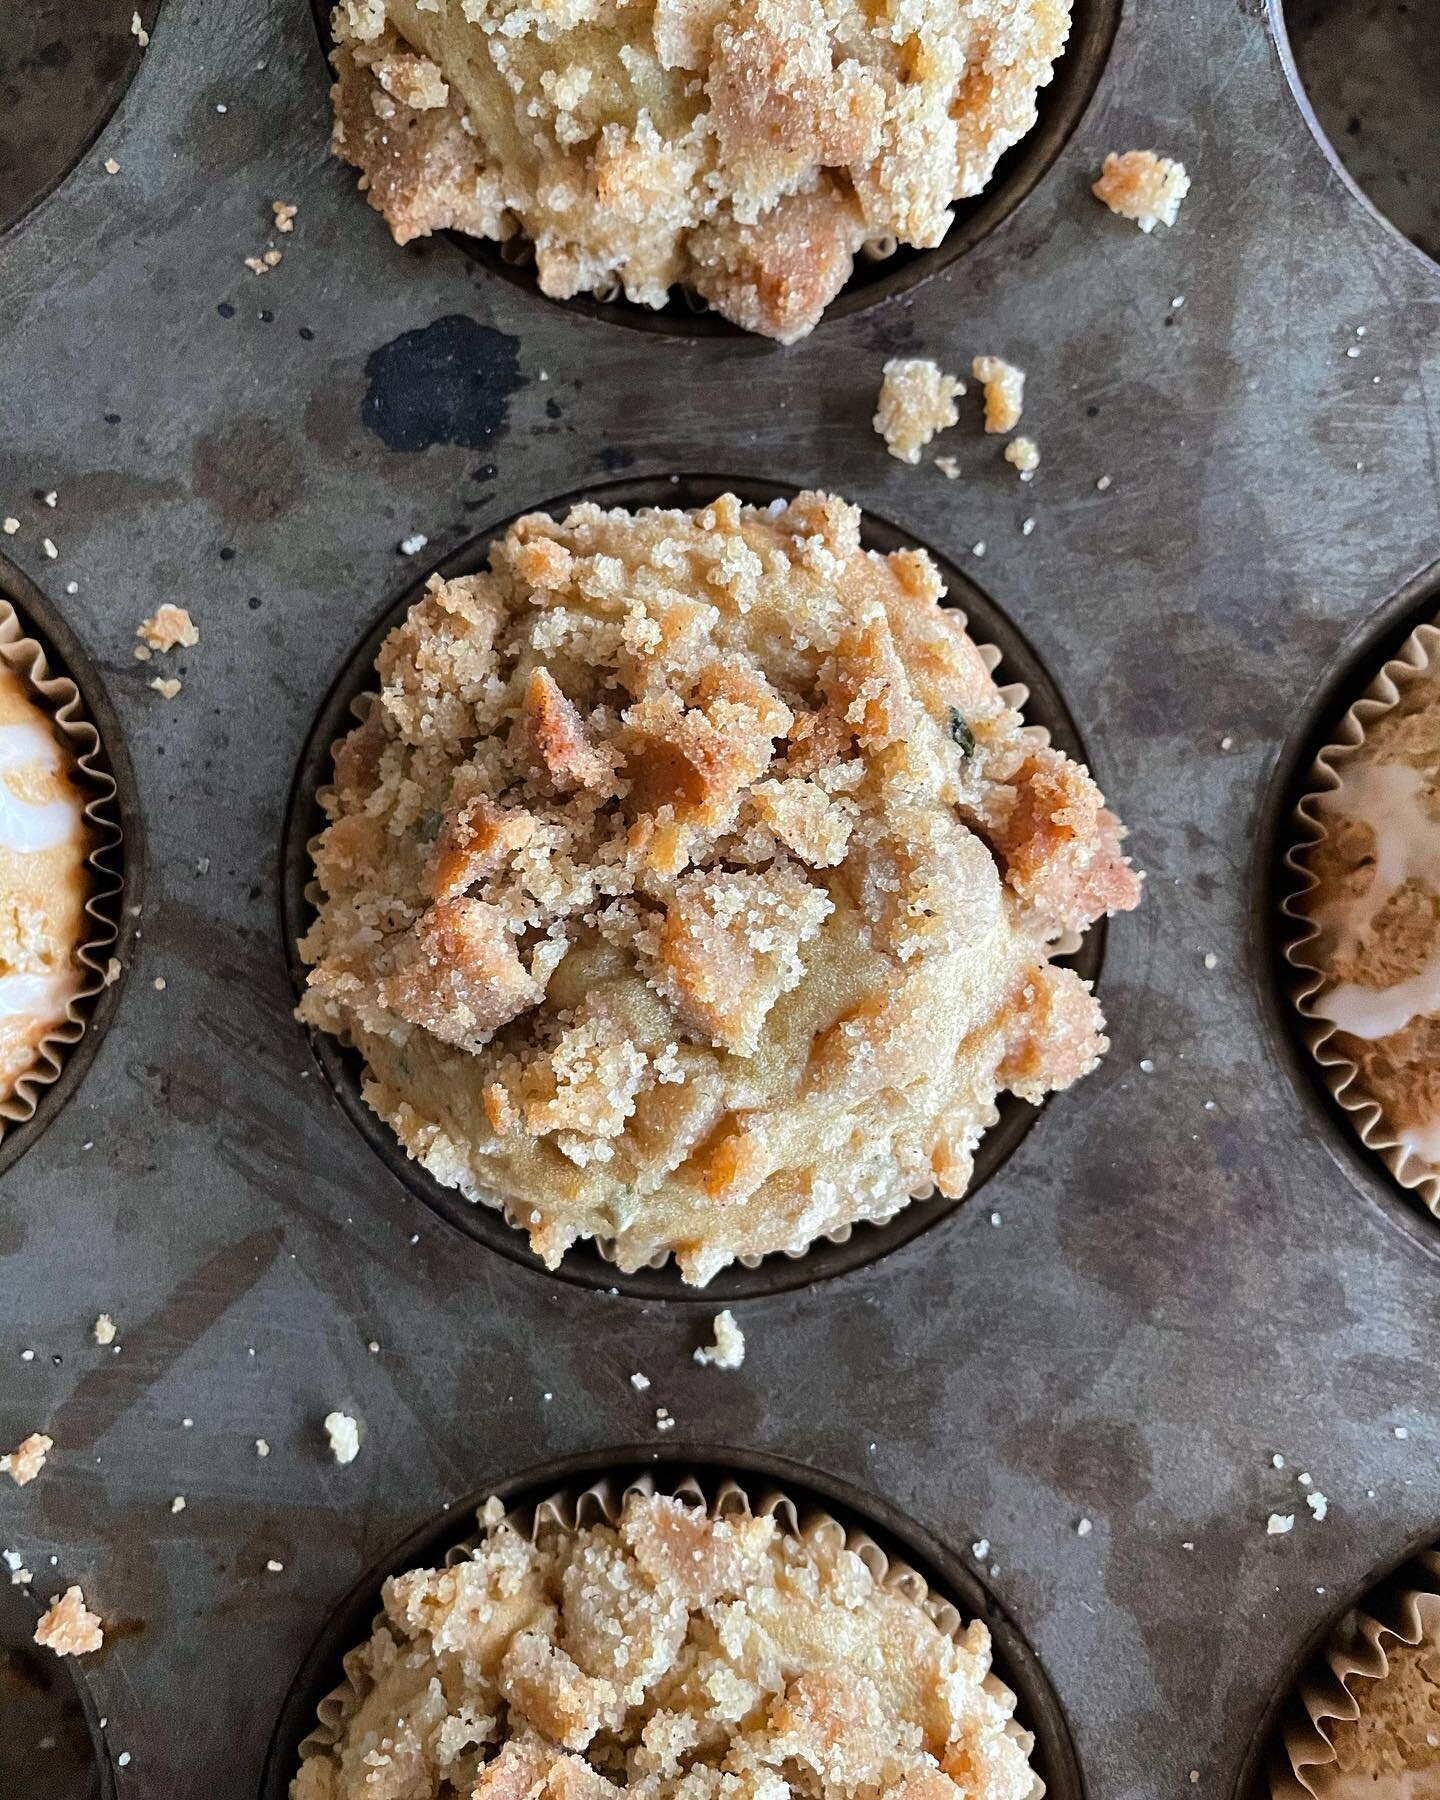 So excited to be featured in @kingarthurbaking&rsquo;s Baking a Stand program! I wrote a recipe for these rosemary lemon and brown butter muffins, that they are selling in their cafe to raise funds for @nefoclandtrust. And they made donations to two 